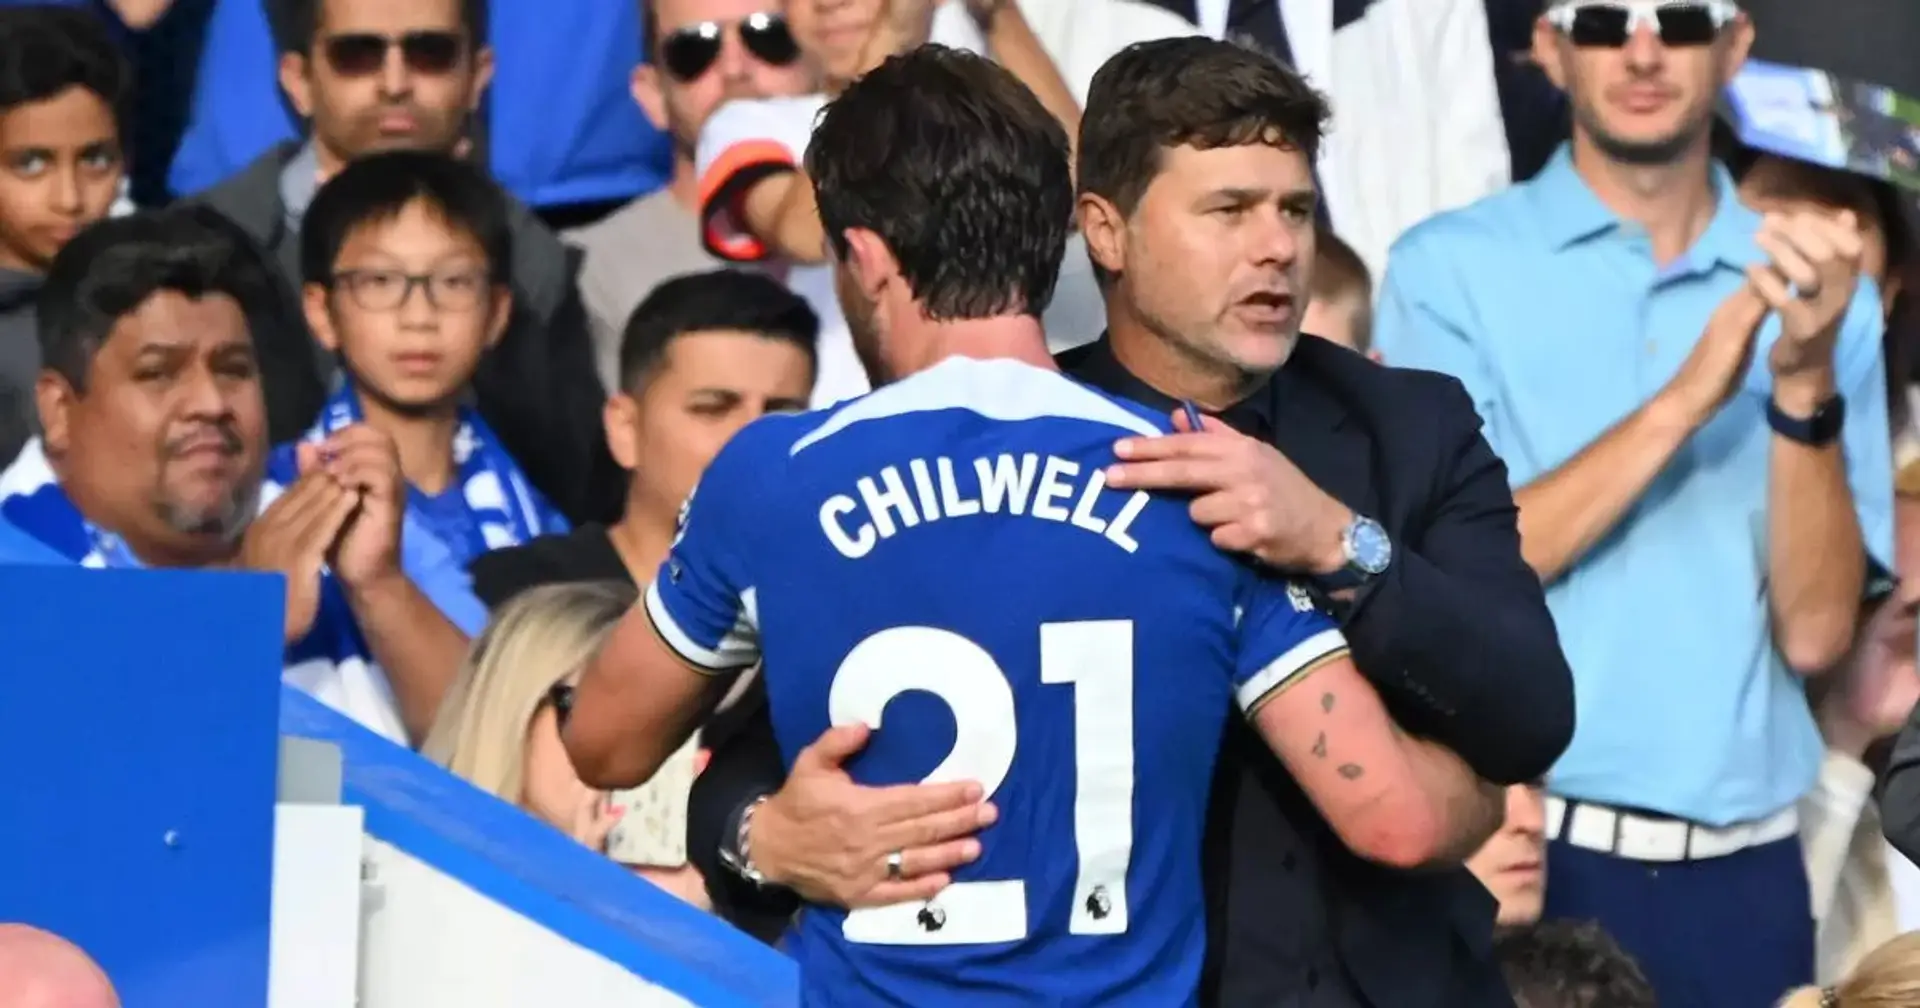 'We will see if he can cope': Pochettino on starting Chilwell v Boro